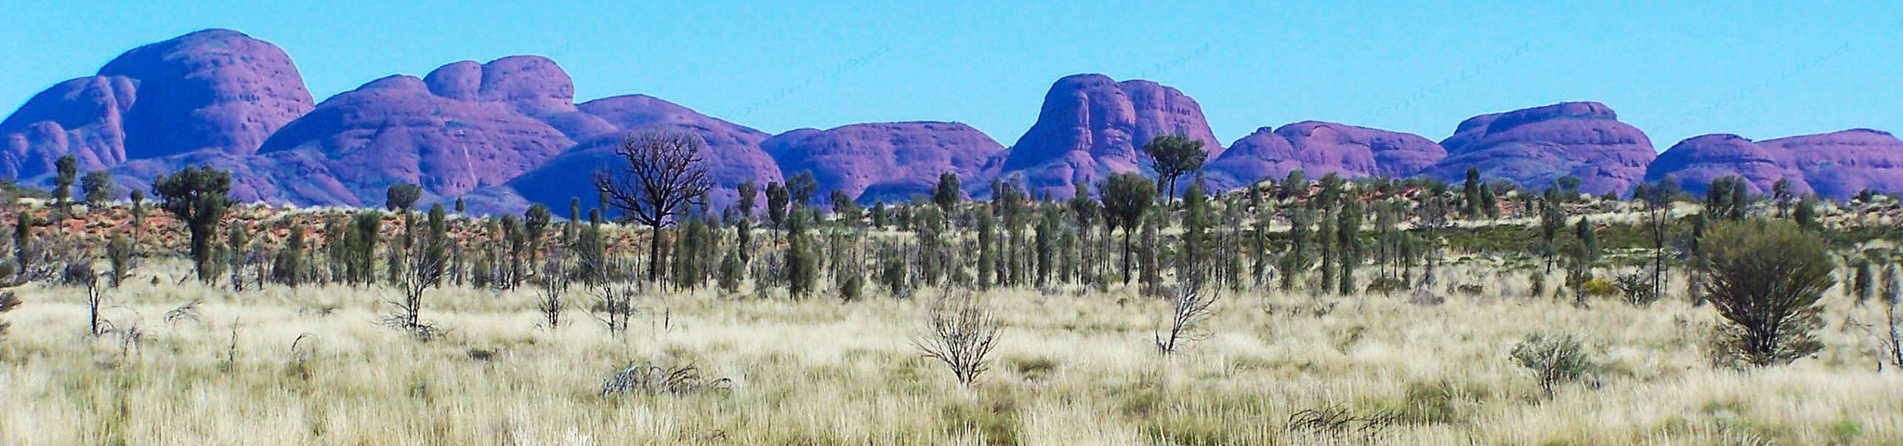 What else is there to do at Uluru Besides the Rock?